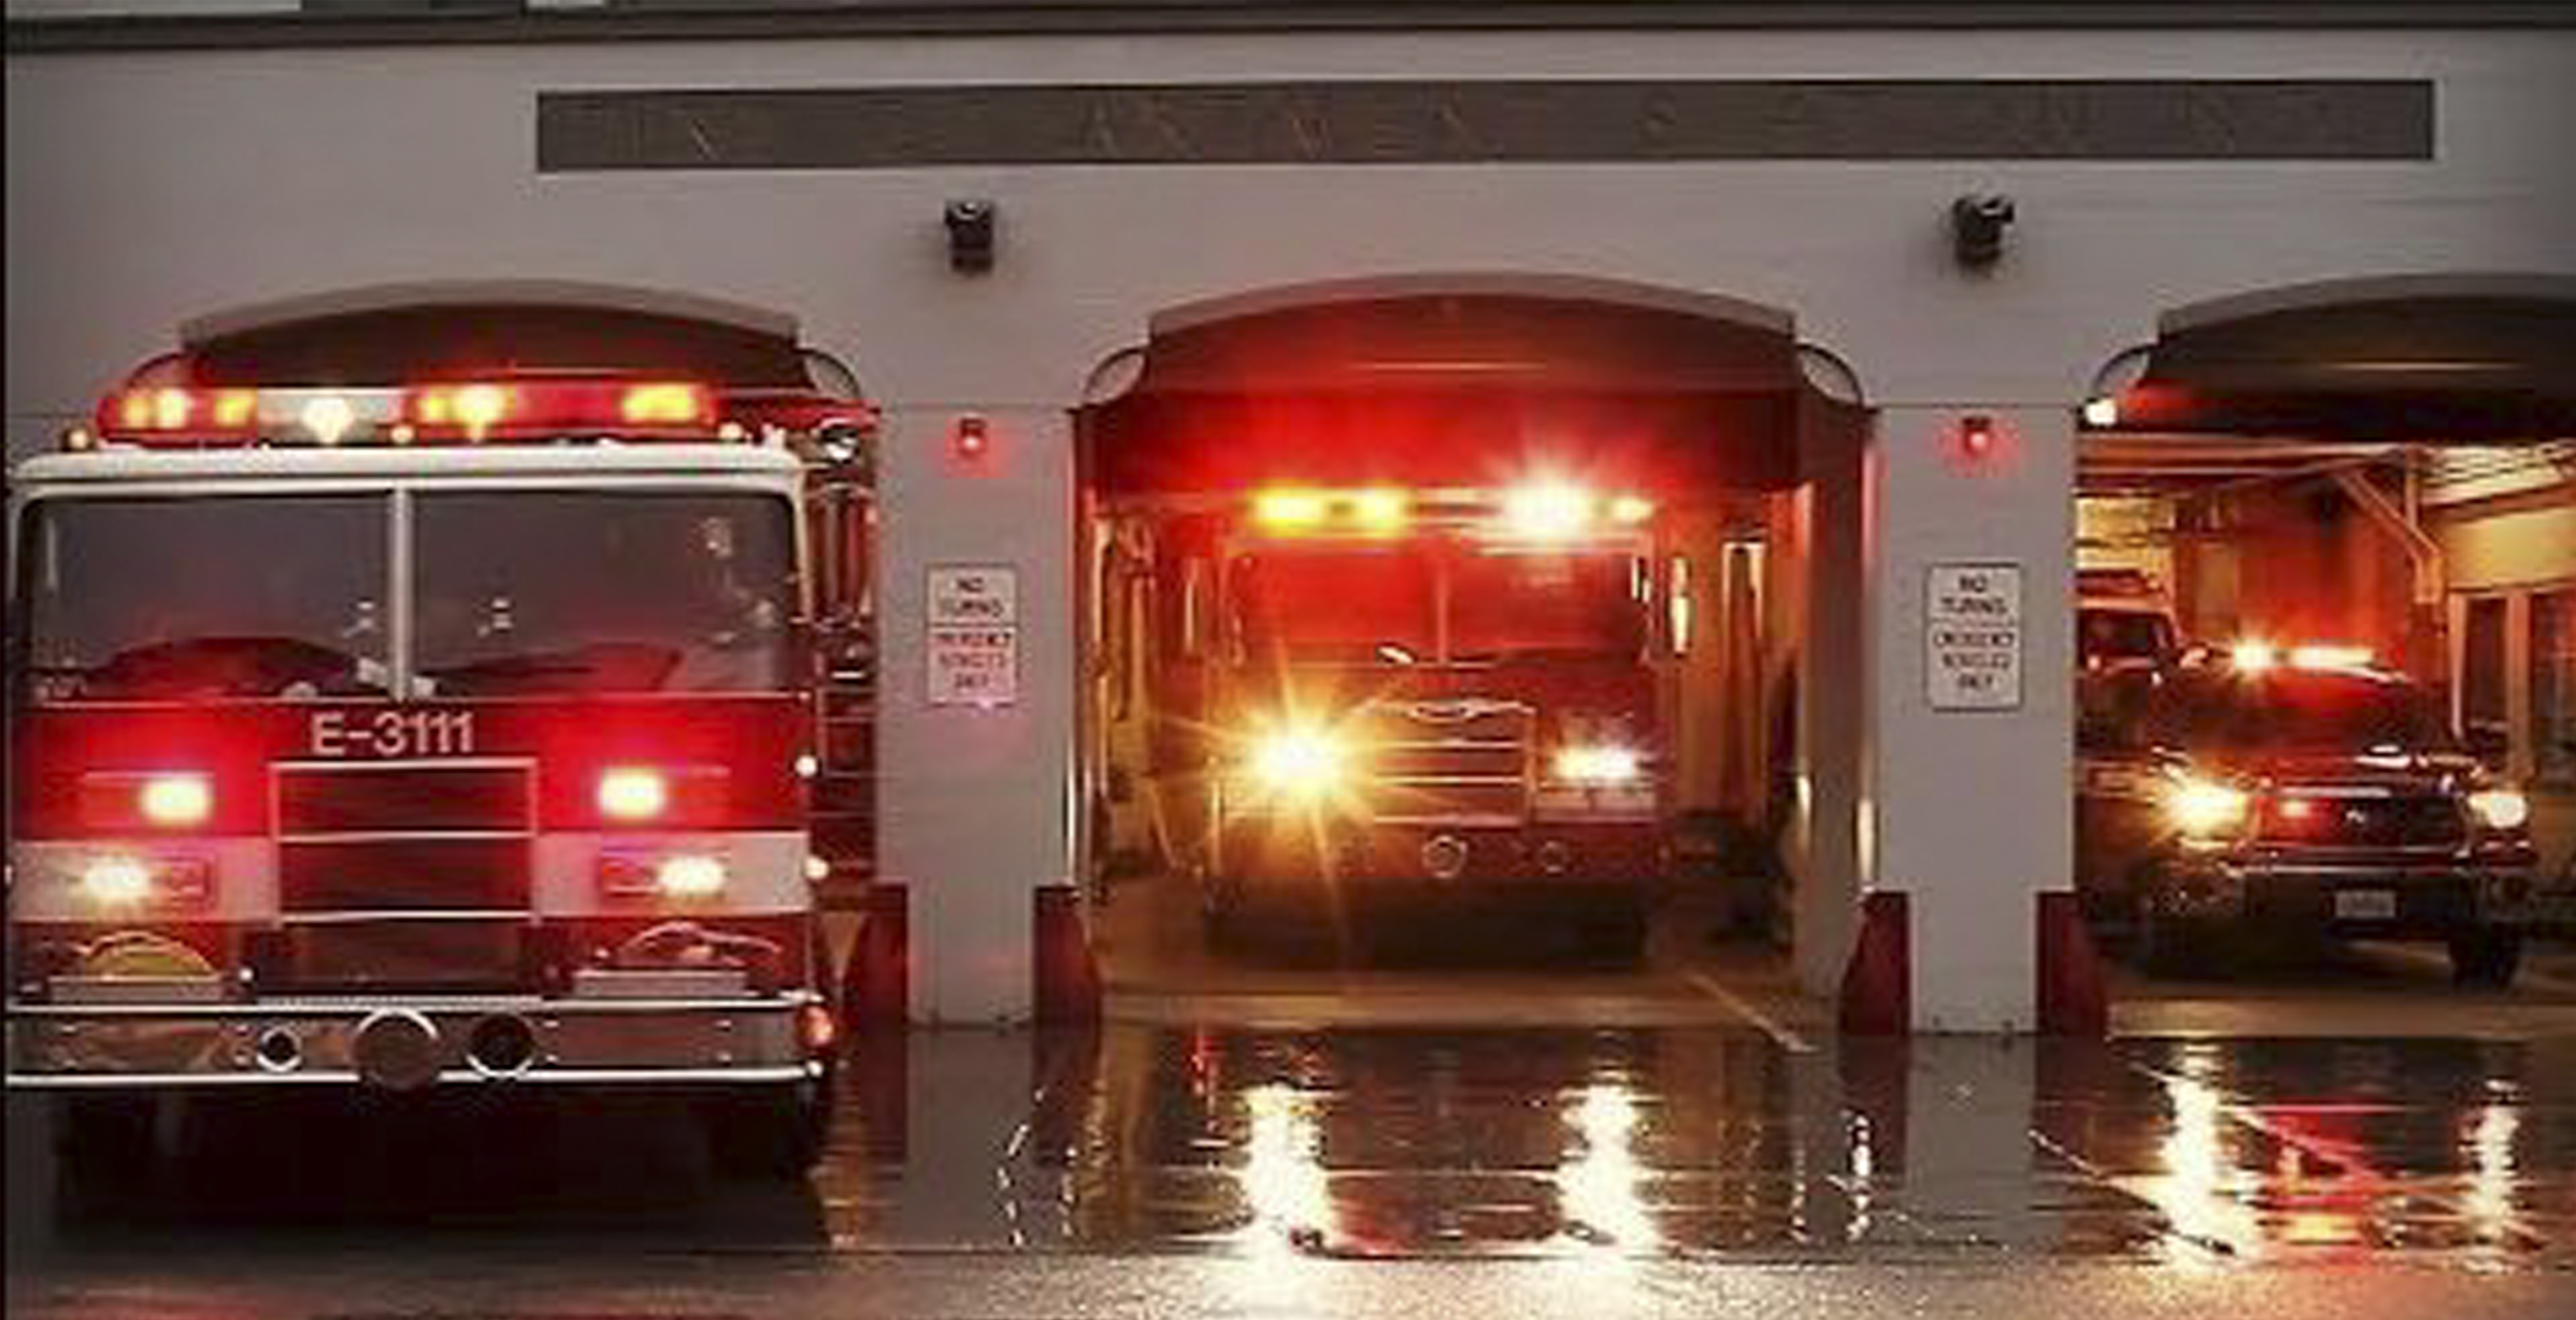 Fire Trucks with lights leaving the station